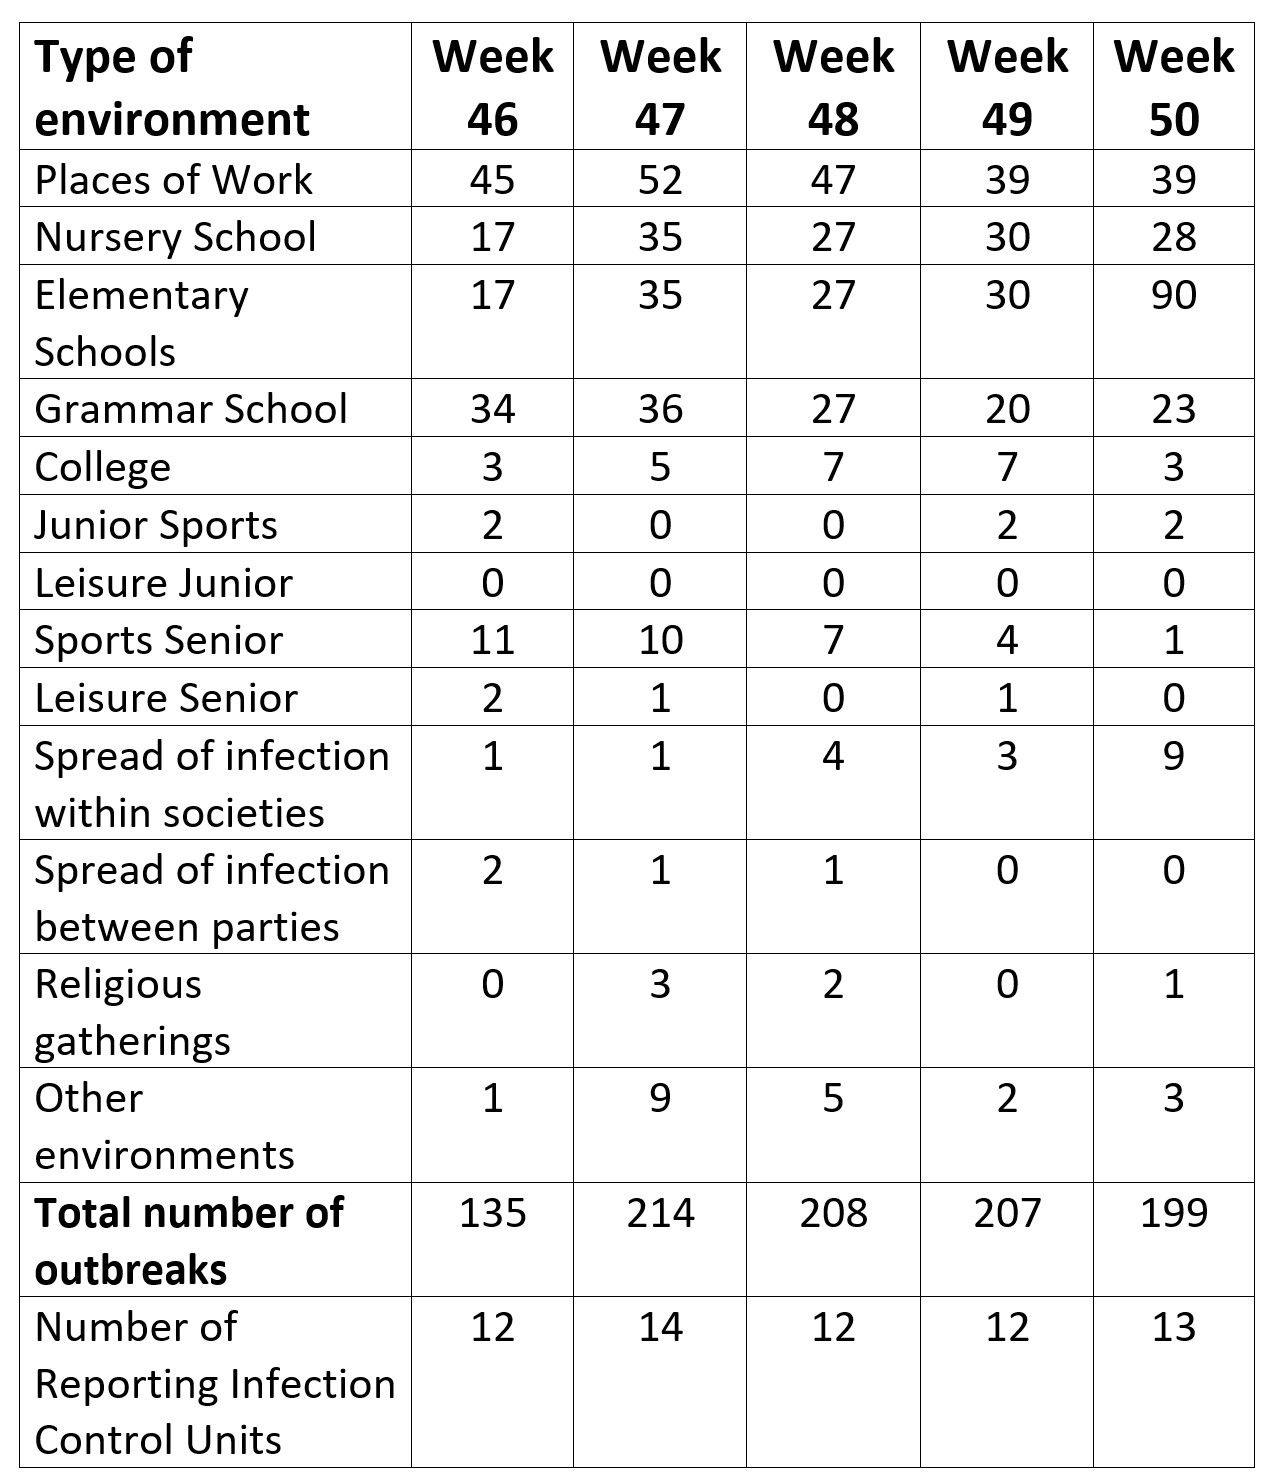 Table. Sweden for Year 2020: Number of outbreaks in environments for the public (Non-Medical) per week. 